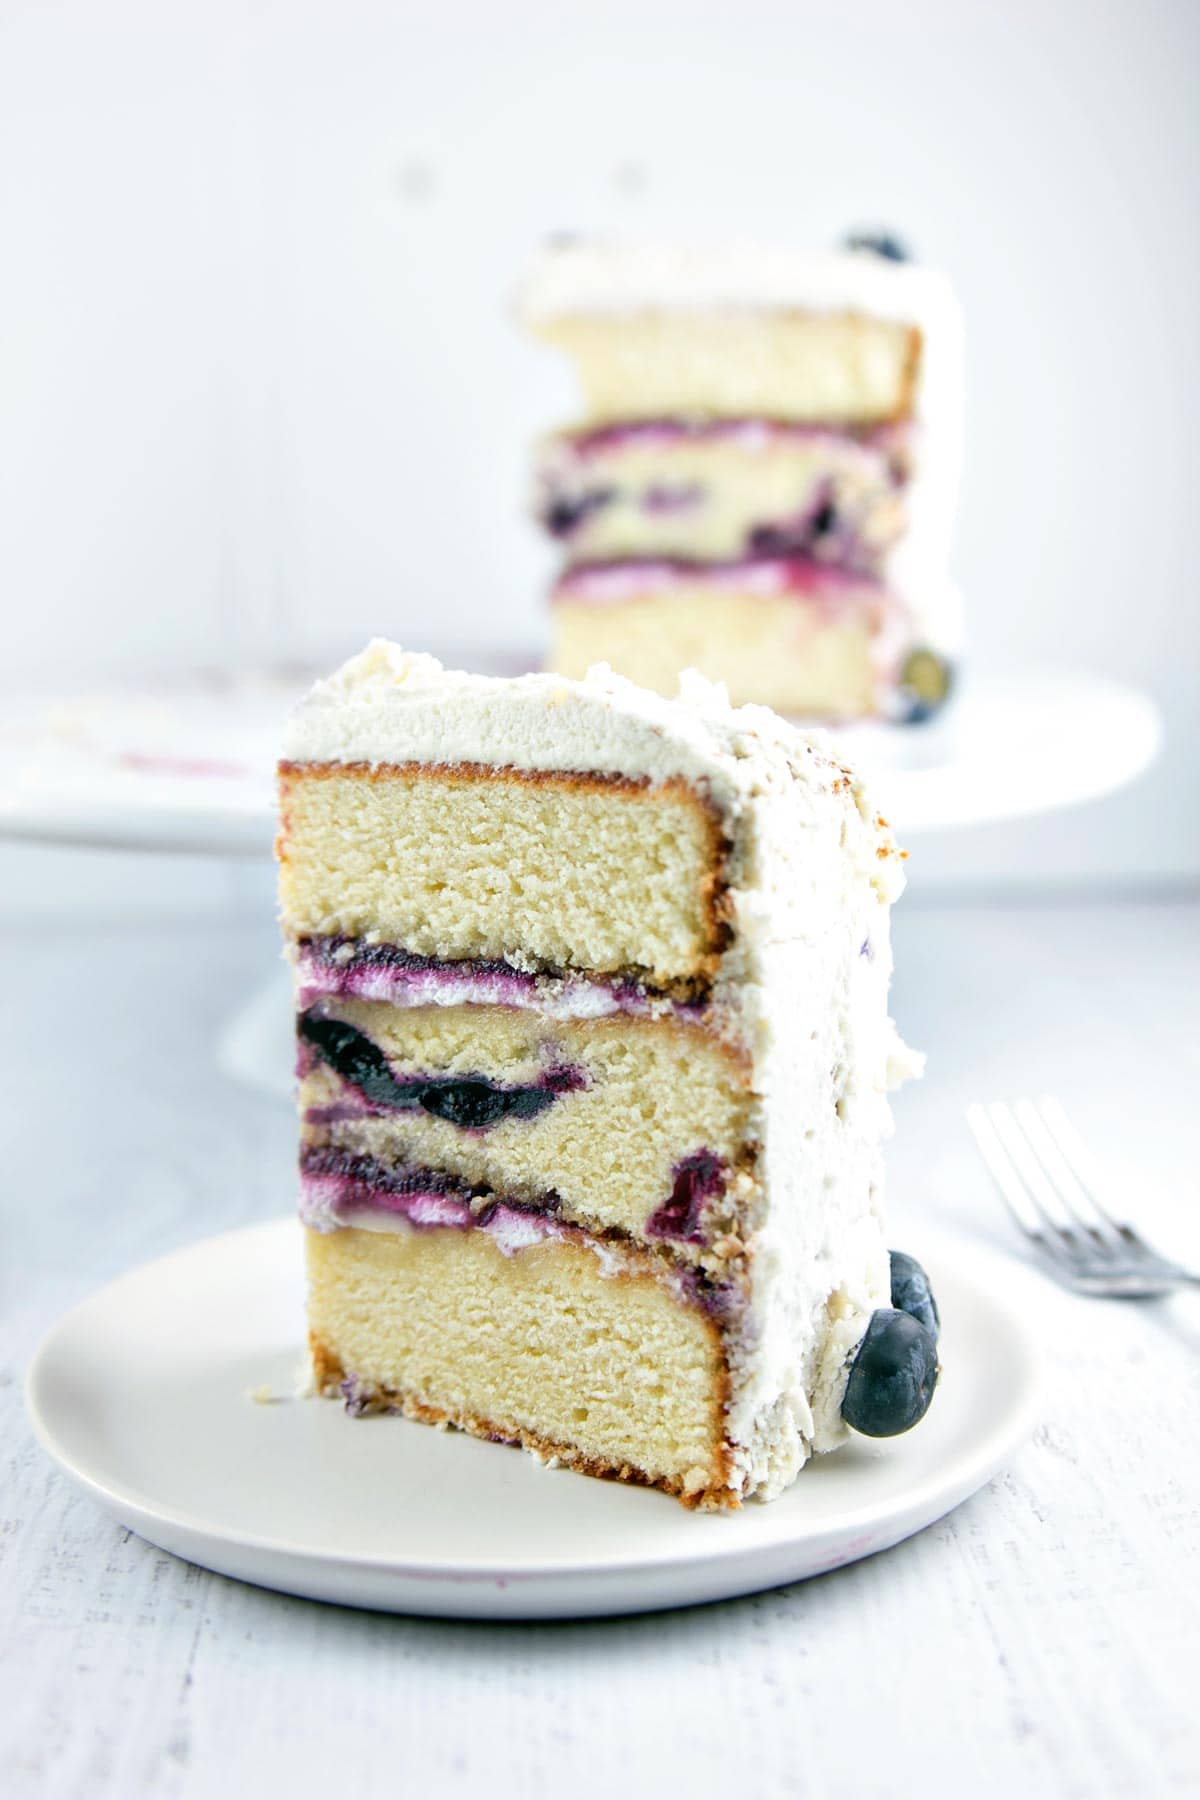 Vanilla Layer Cake with Blueberry Cardamom Curd: A three-layer blueberry vanilla cake filled with blueberry cardamom curd and covered with whipped cream. Simple flavors combine to make a spectacular dessert! {Bunsen Burner Bakery}